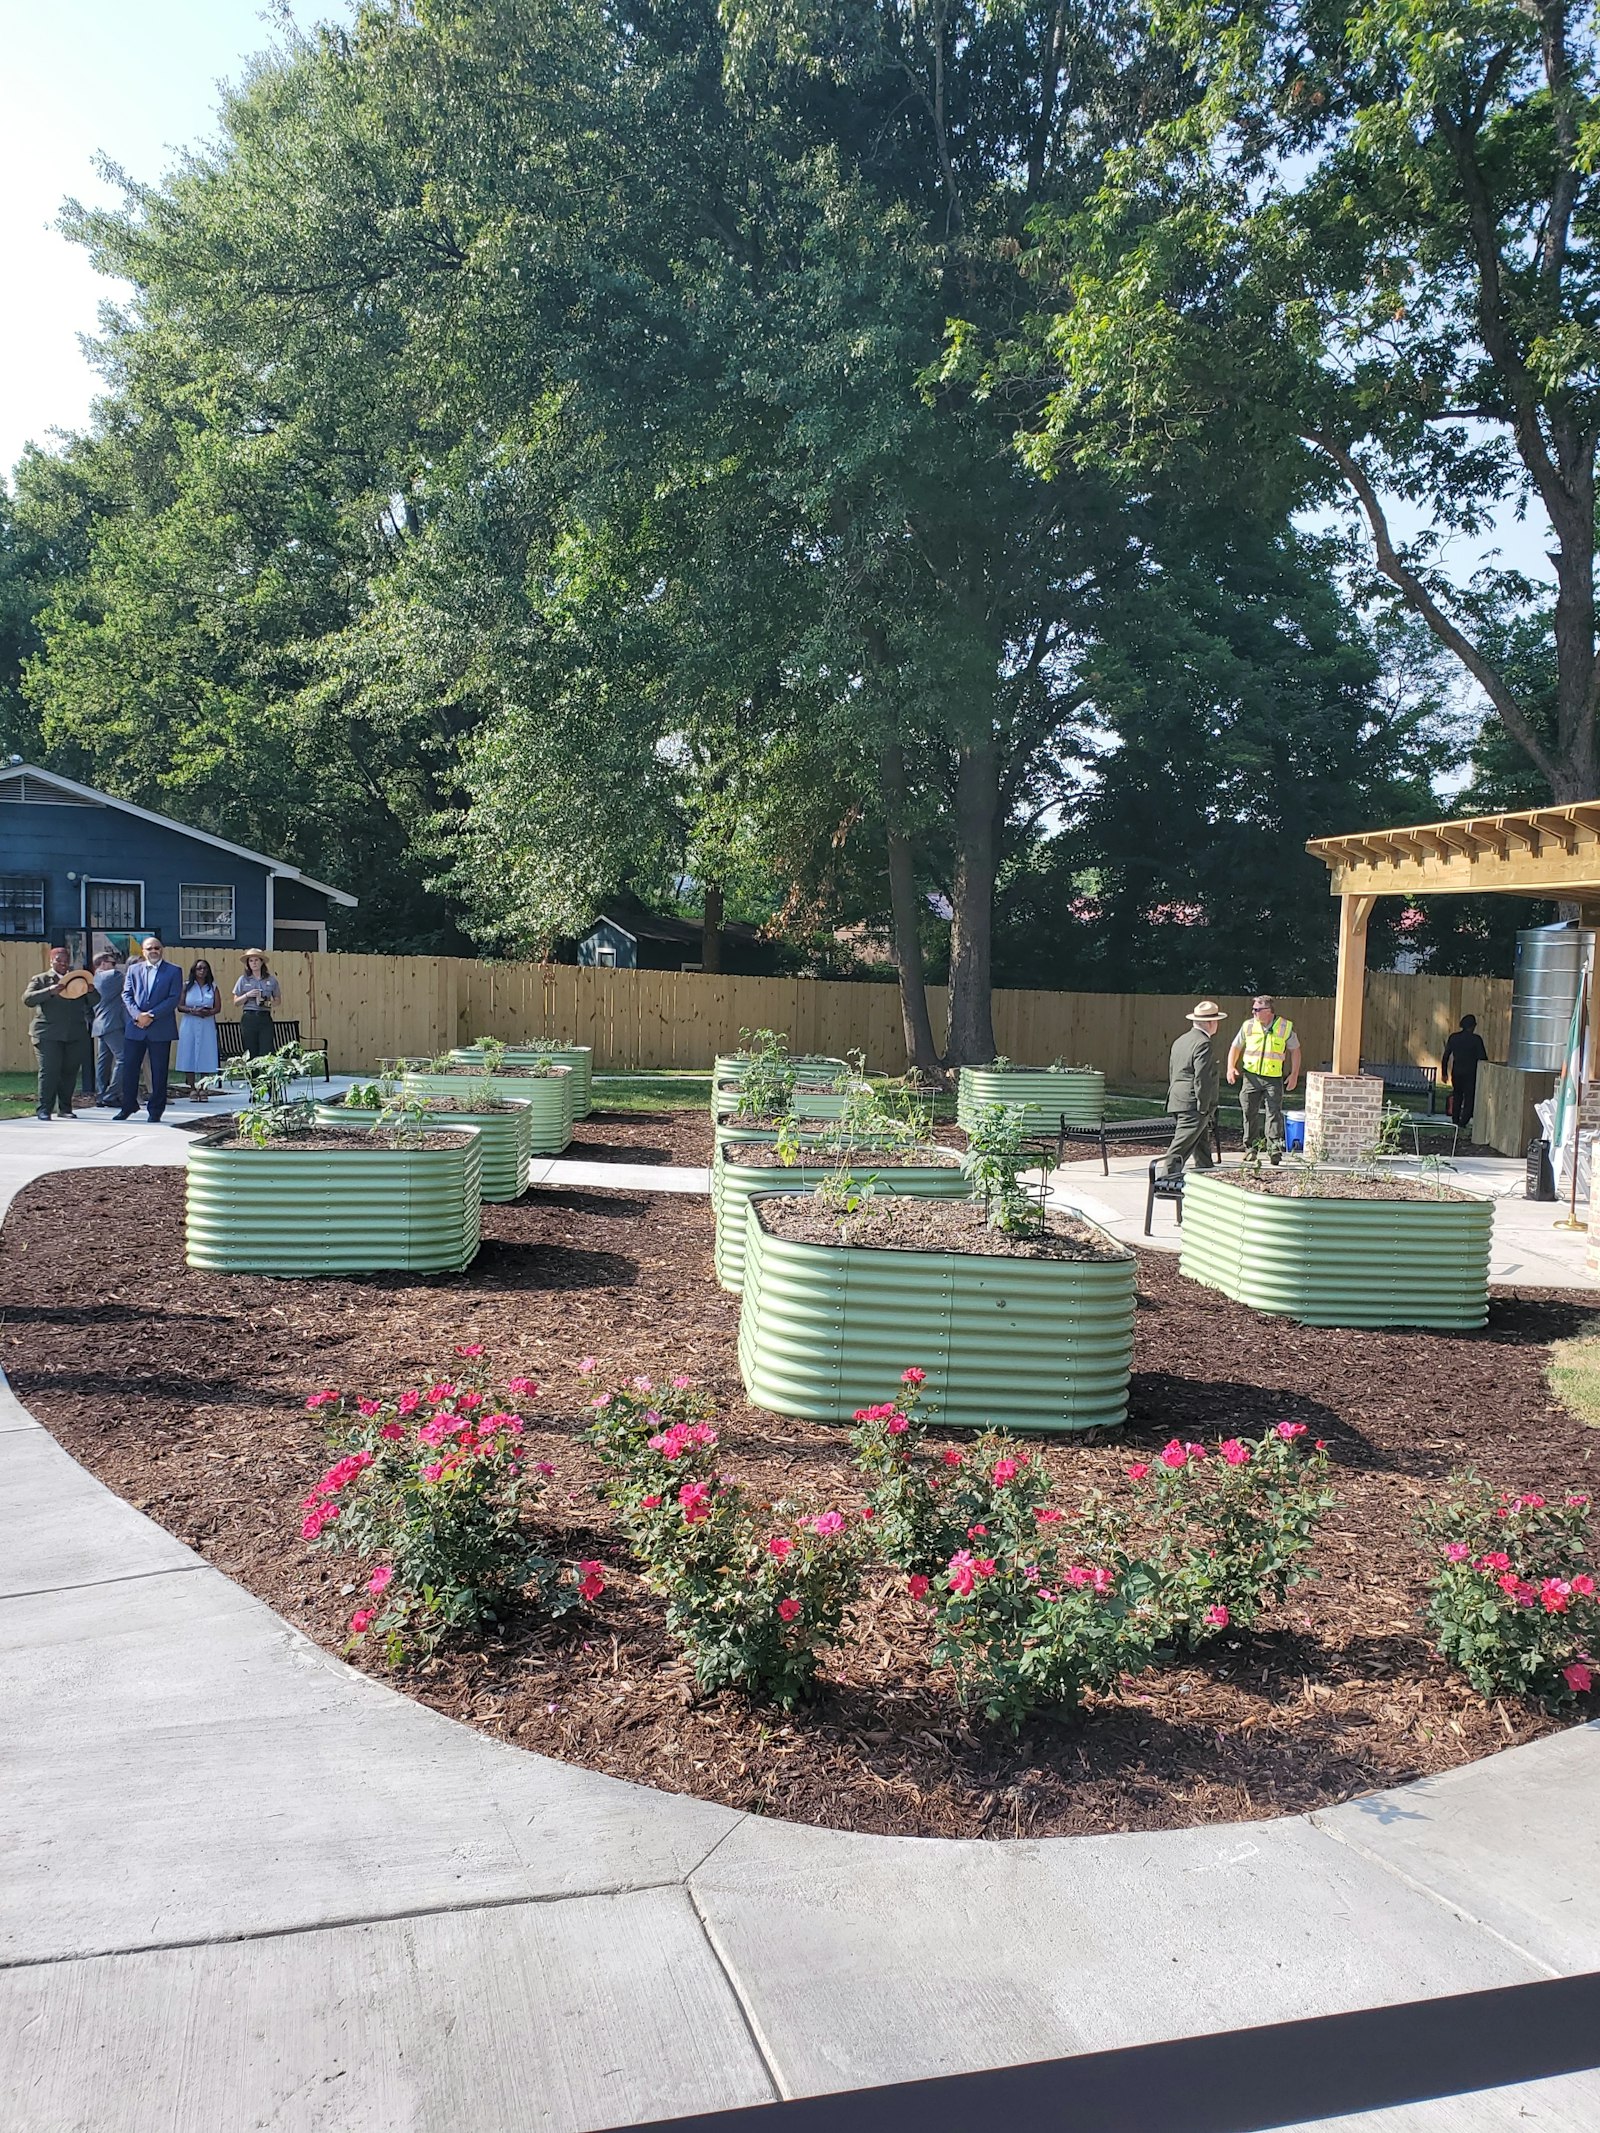 Raised garden beds in a community garden, with a paved path winding around